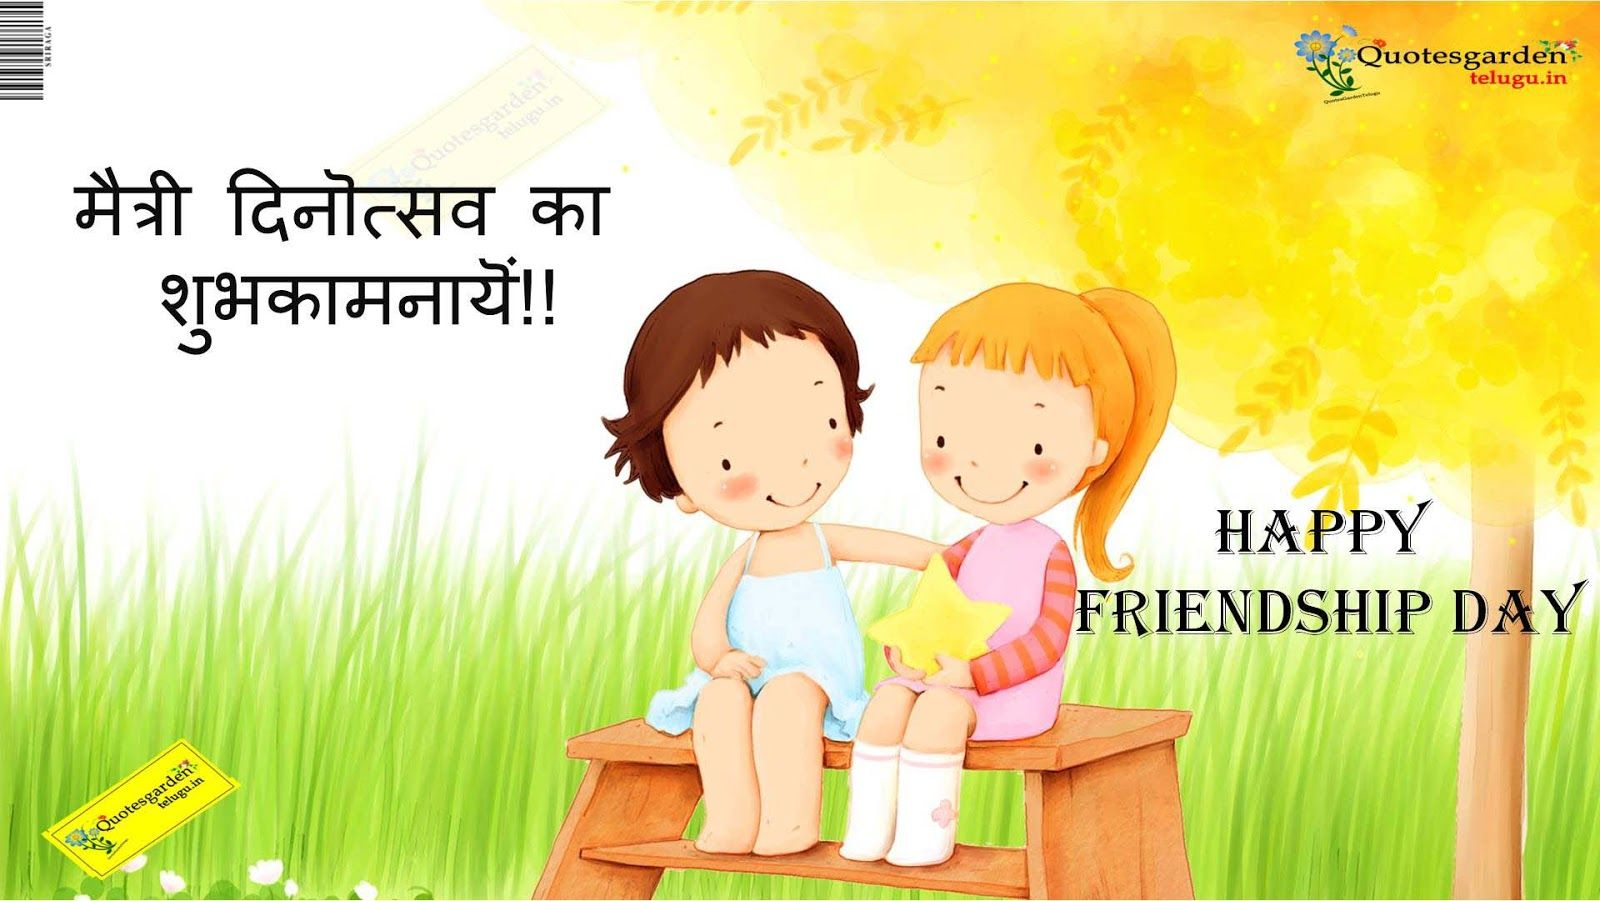 Friendship day hindi quotes wallpaper image wishes greetings picture photo in Hindi 747. QUOTES GARDEN TELUGU. Telugu Quotes. English Quotes. Hindi Quotes